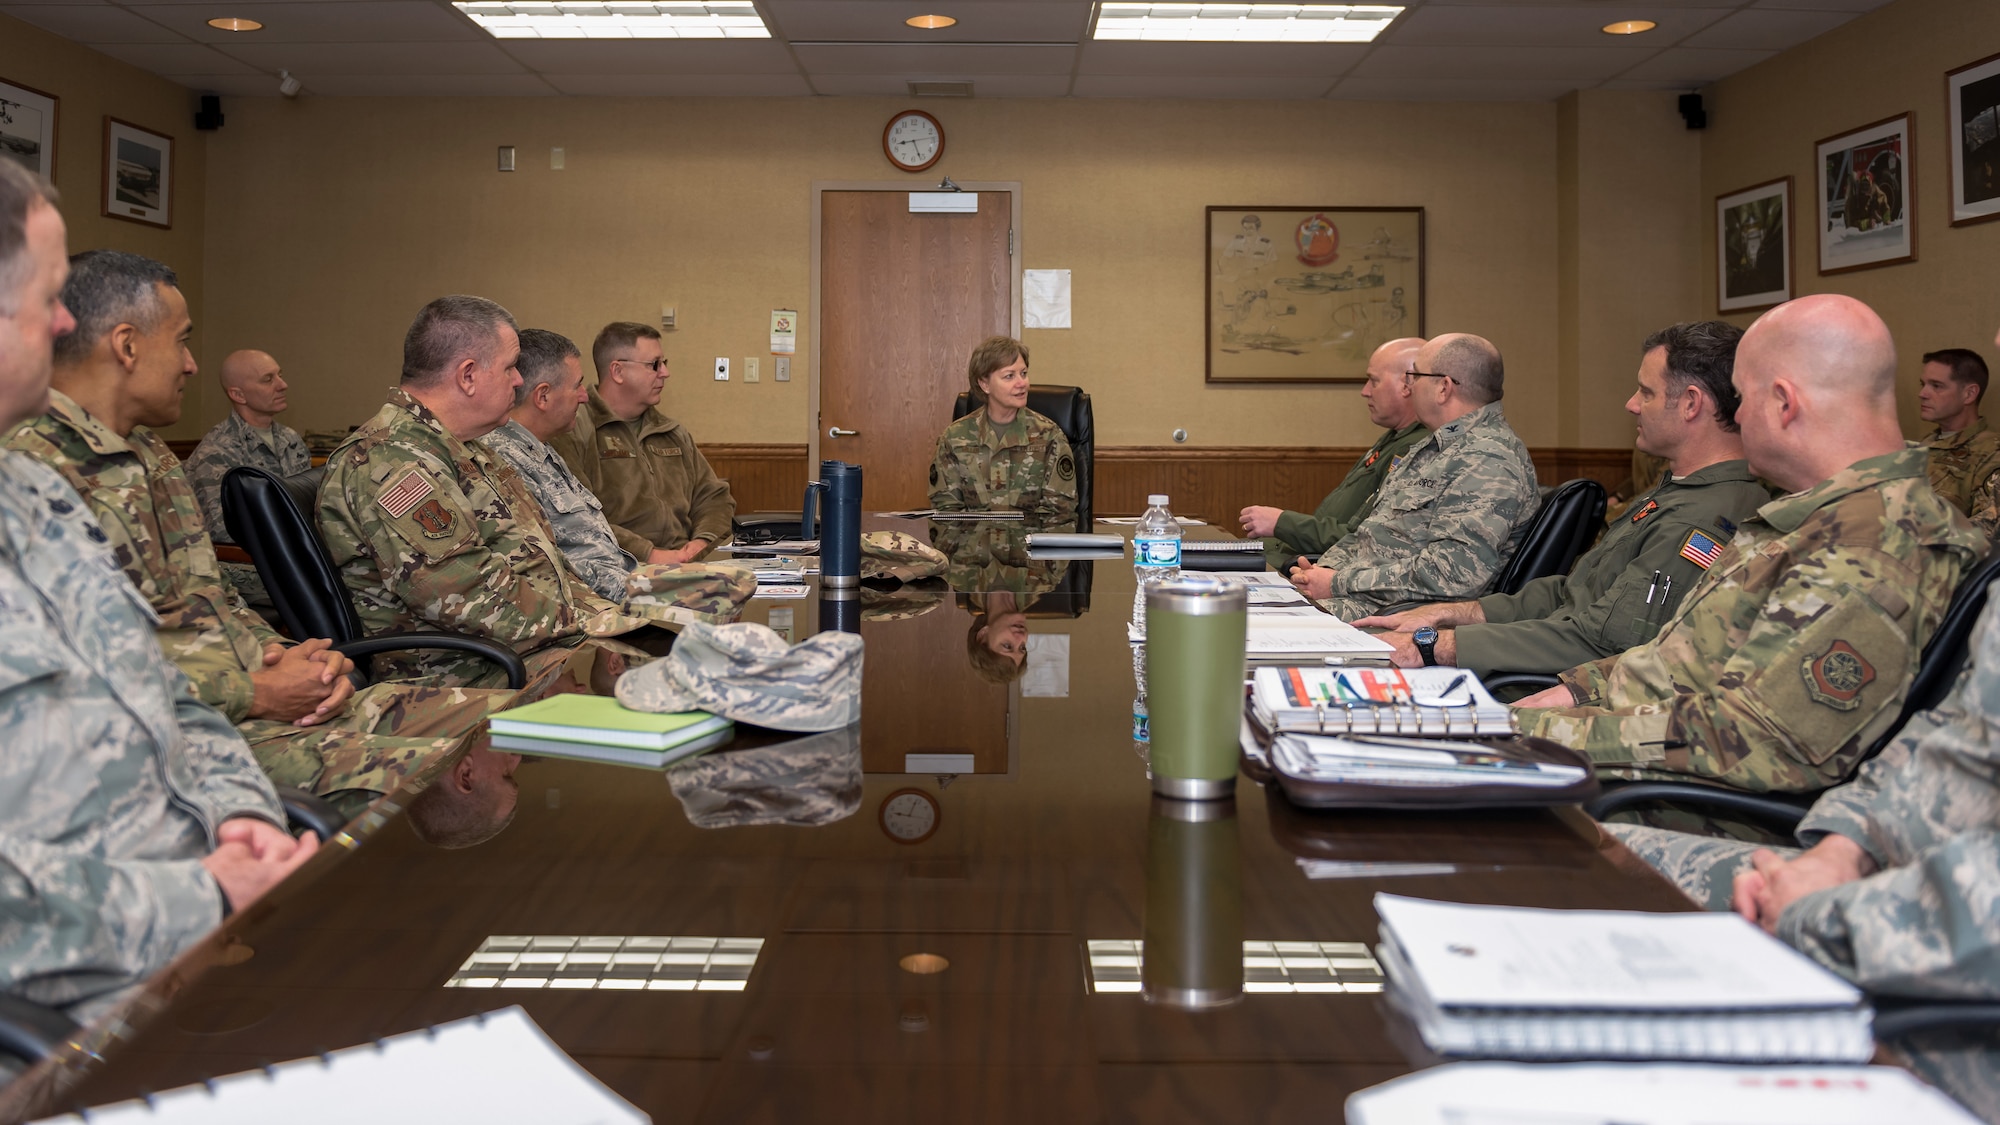 General talking with military members at table.